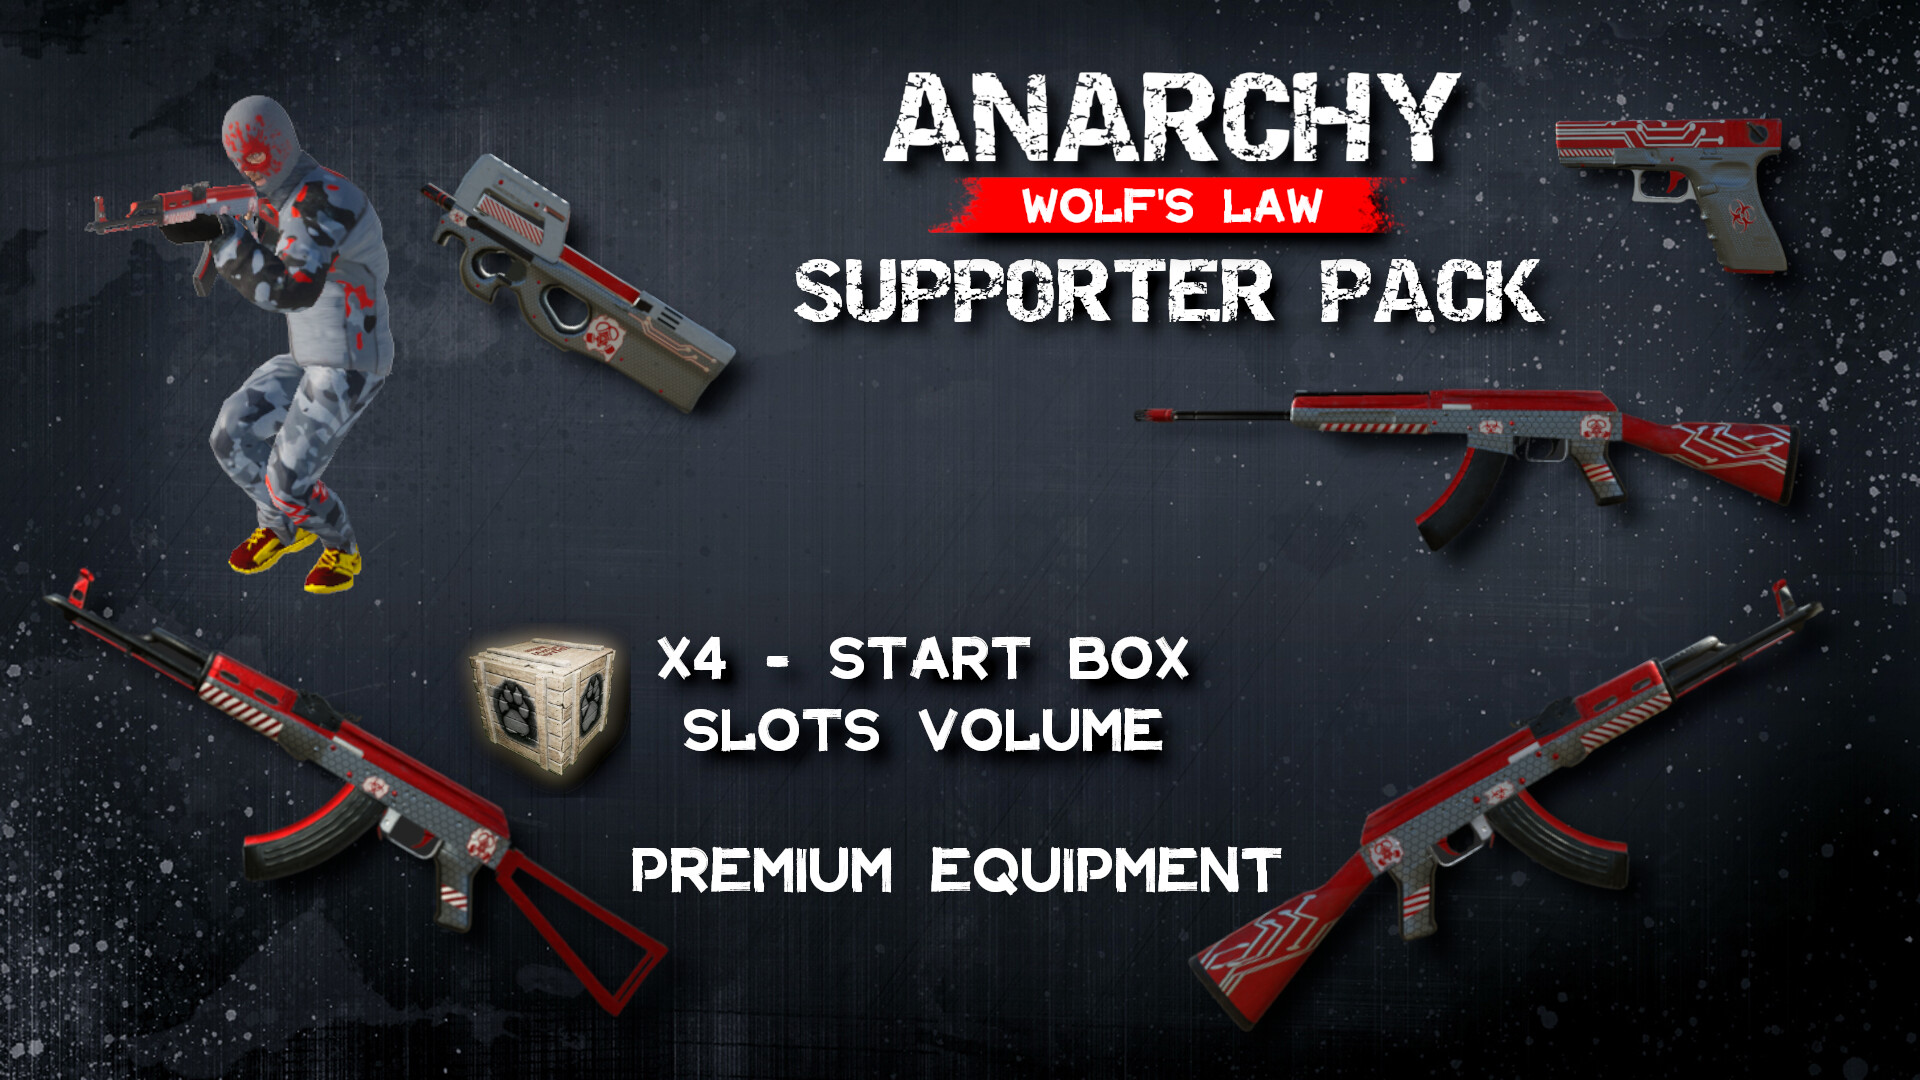 Anarchy: Supporter Pack Featured Screenshot #1